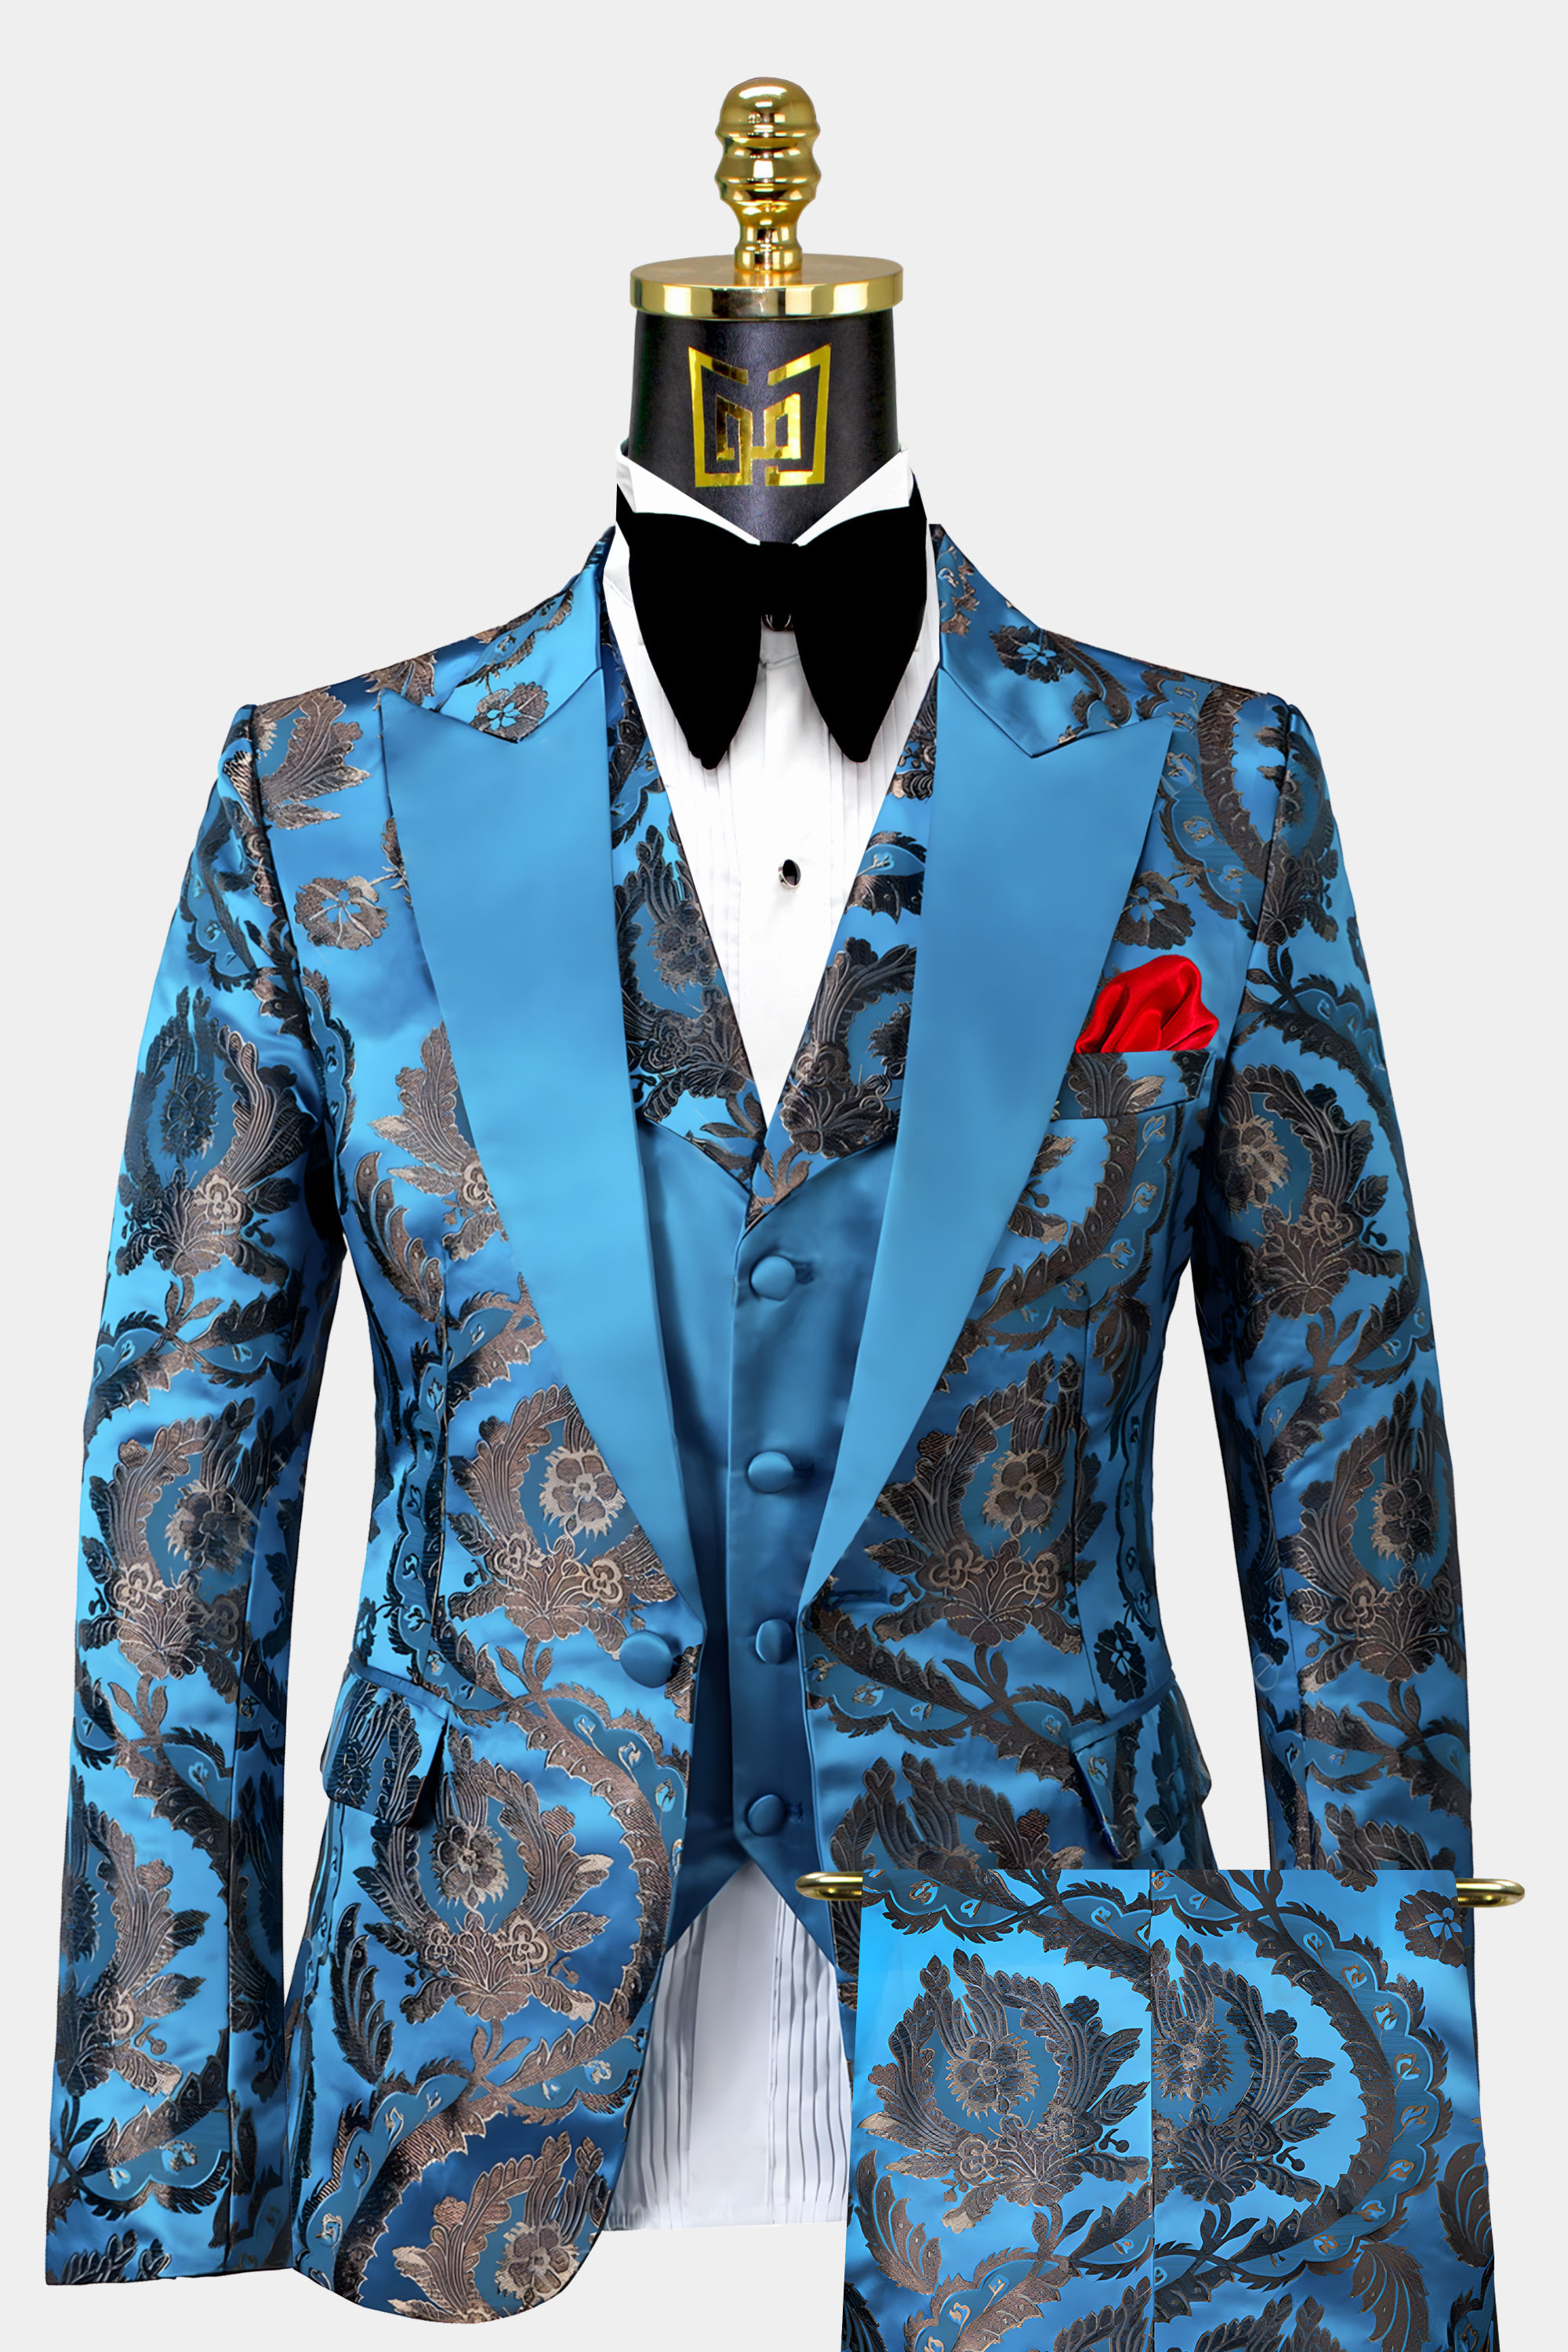 Light Blue Blazer with Dress Pants Outfits For Men (150 ideas